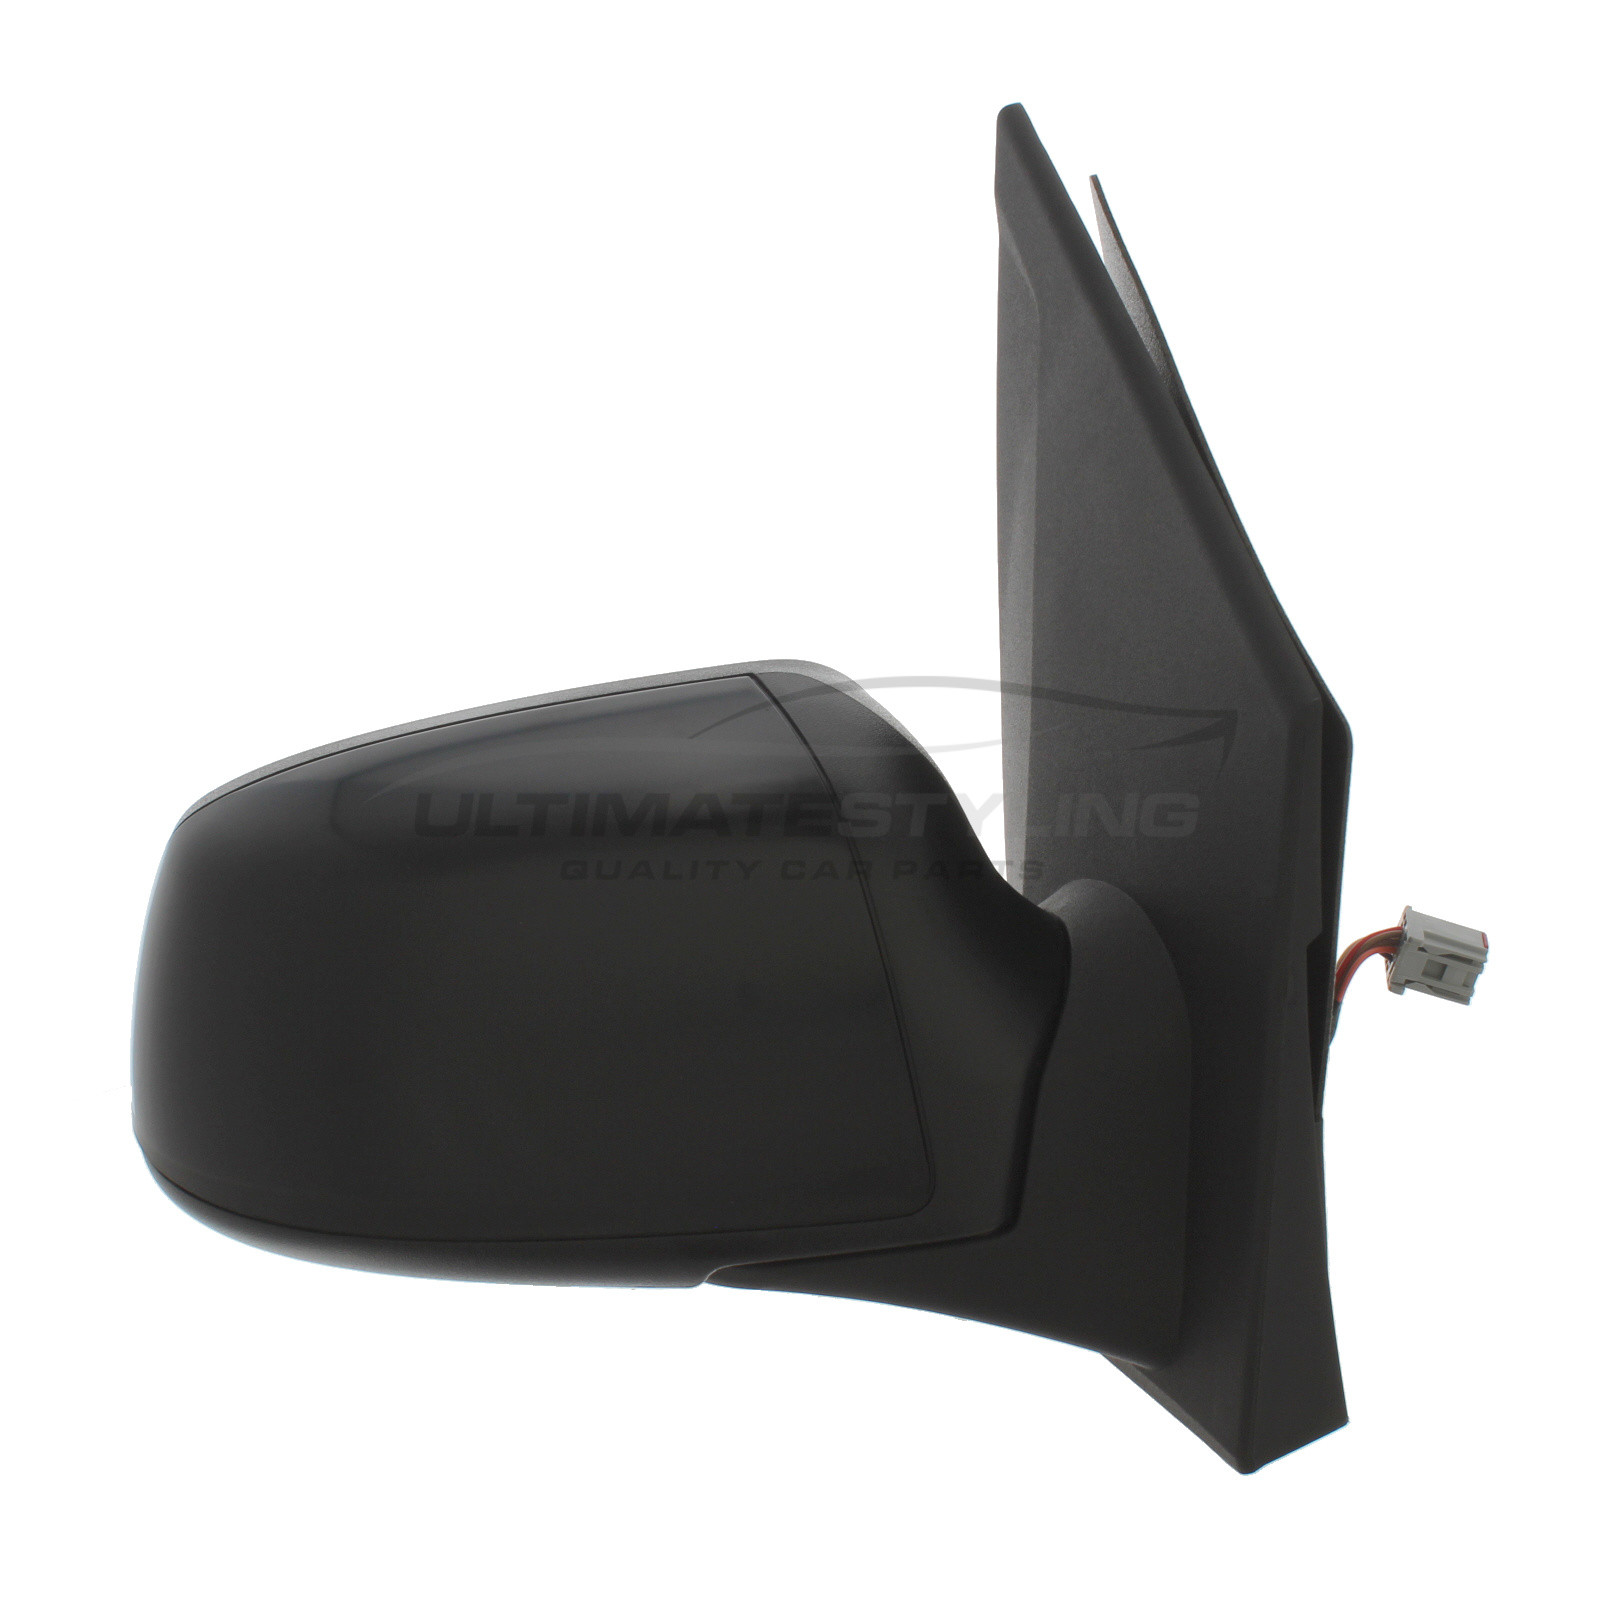 Ford Fiesta Wing Mirror / Door Mirror - Drivers Side (RH) - Electric adjustment - Heated Glass - Power Folding - Paintable - Black